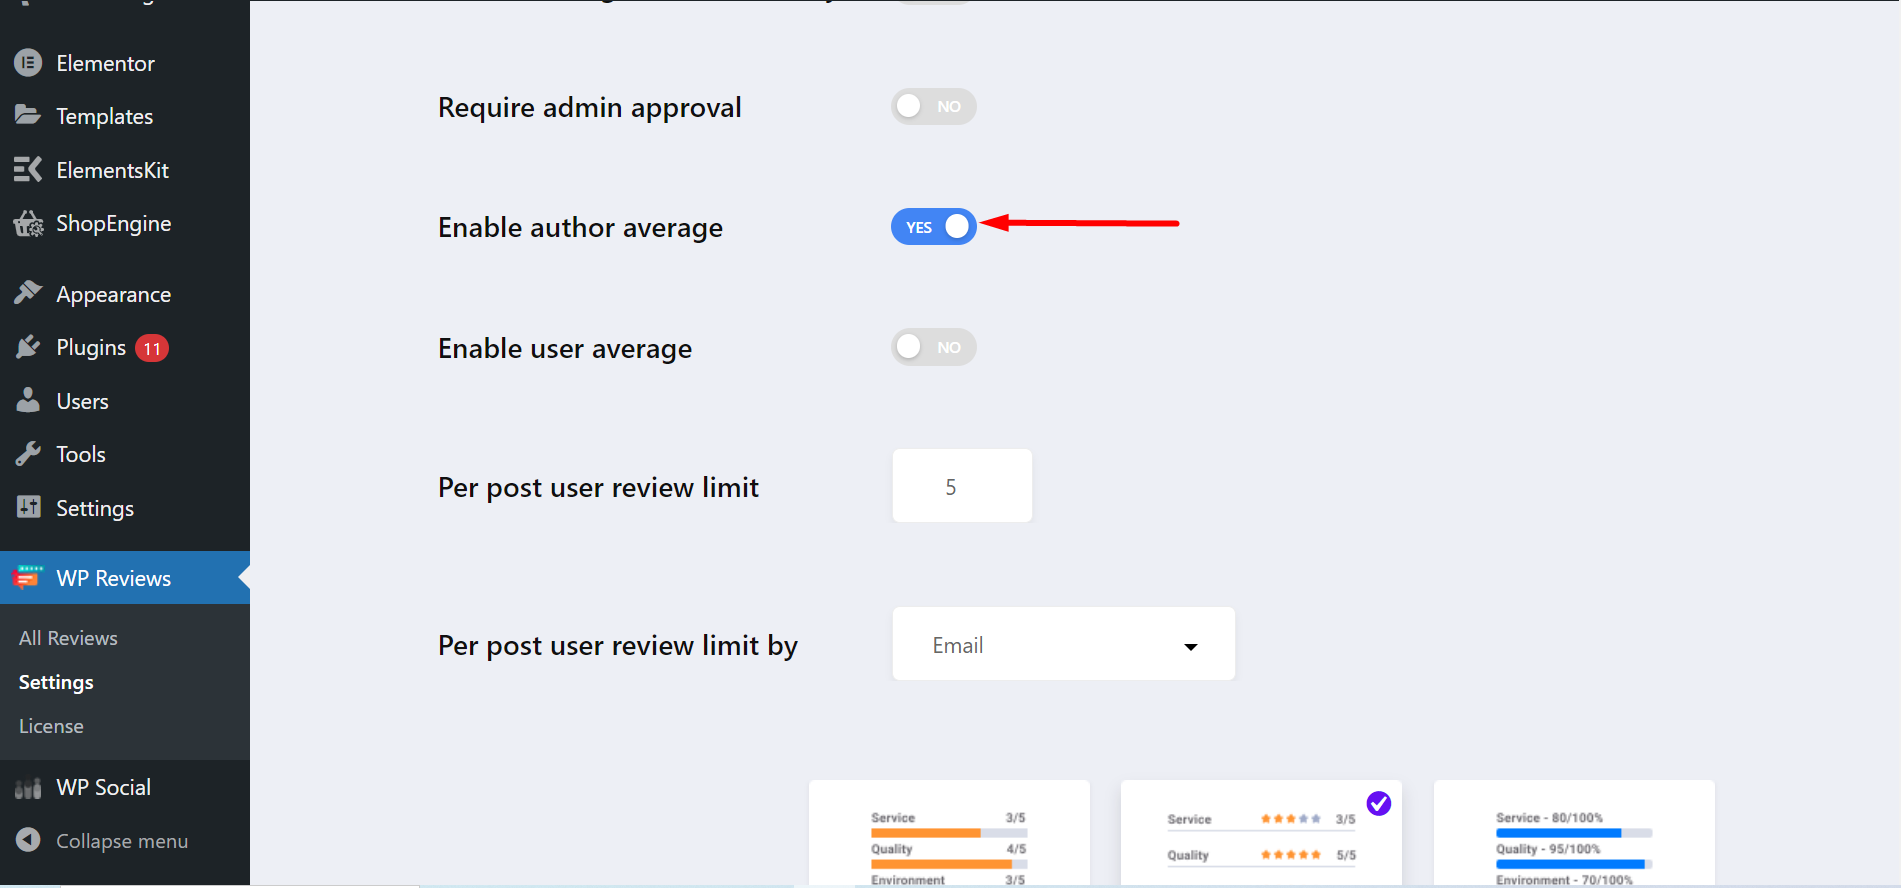 ultimate review global settings- enabling author average